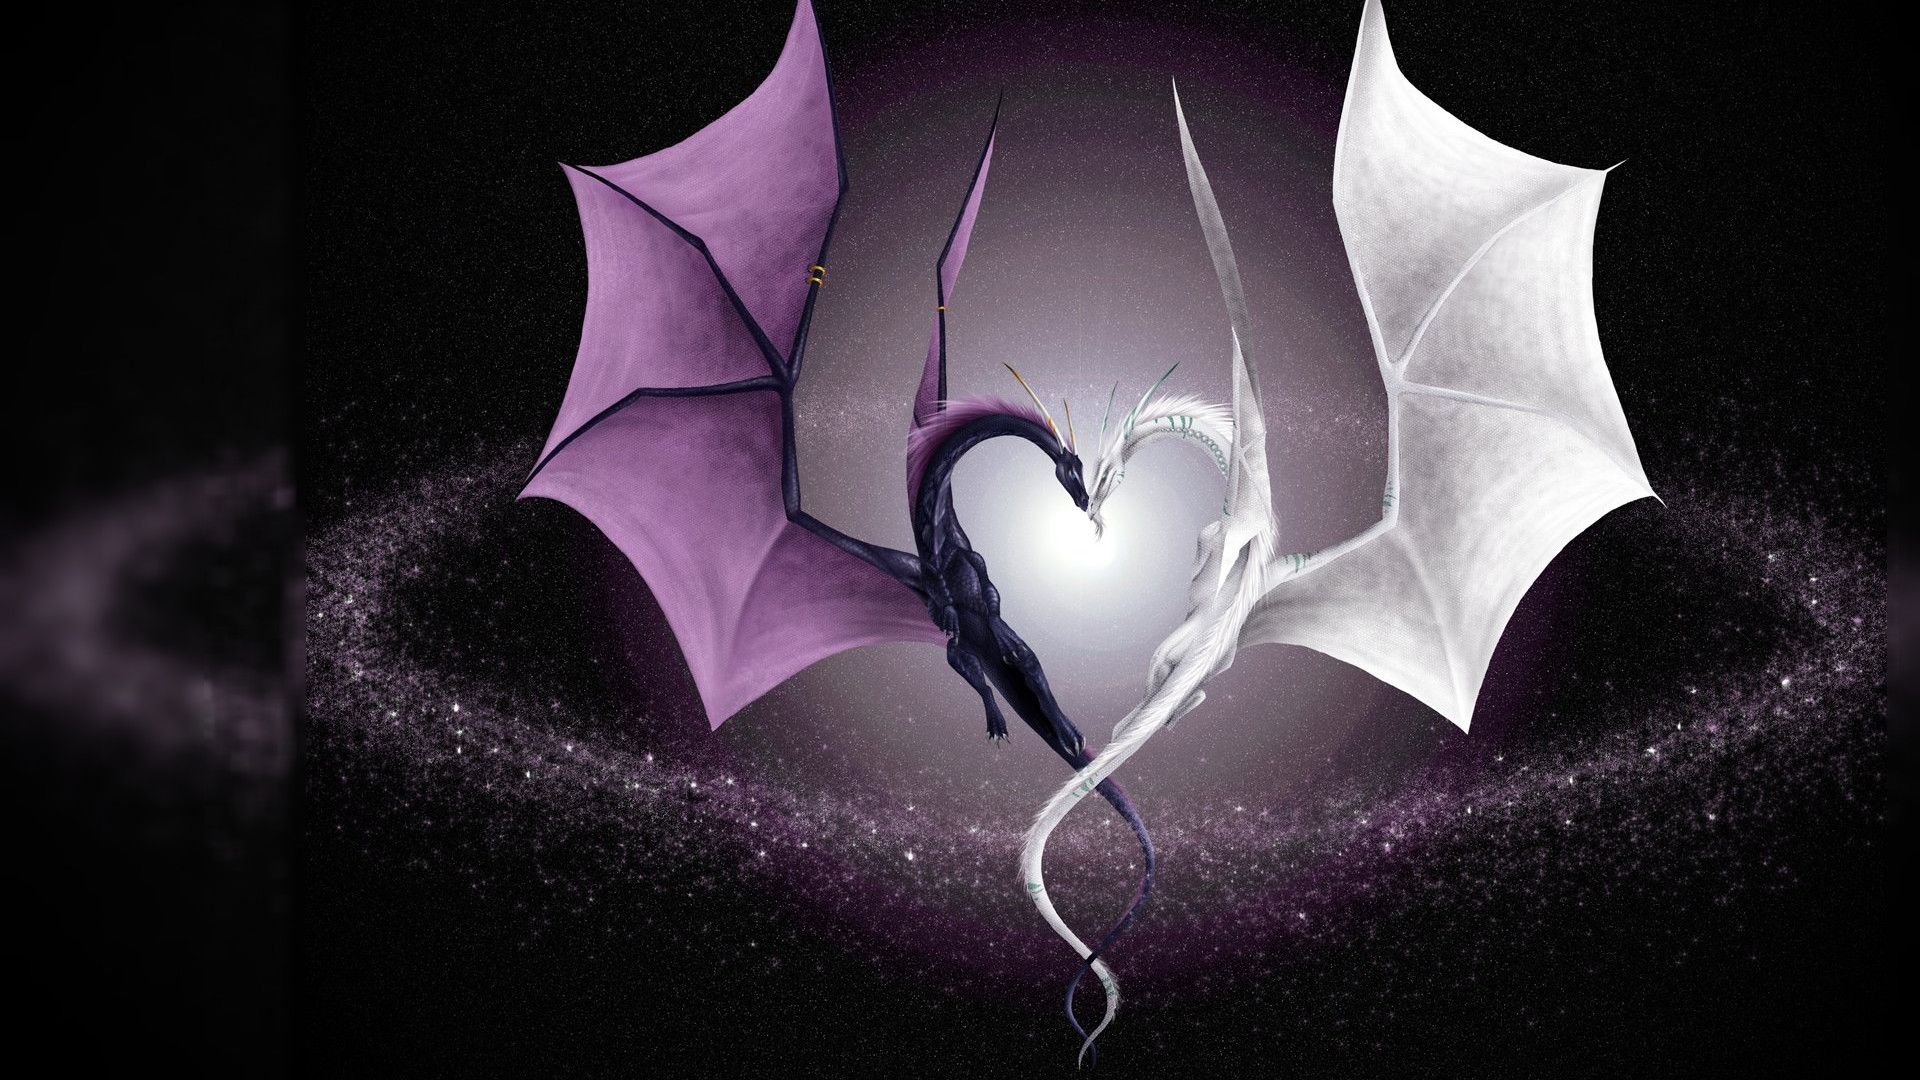 Dragon Love Couple Wallpaper Backgrounds - Wolf Wallpaper In Love - HD Wallpaper 